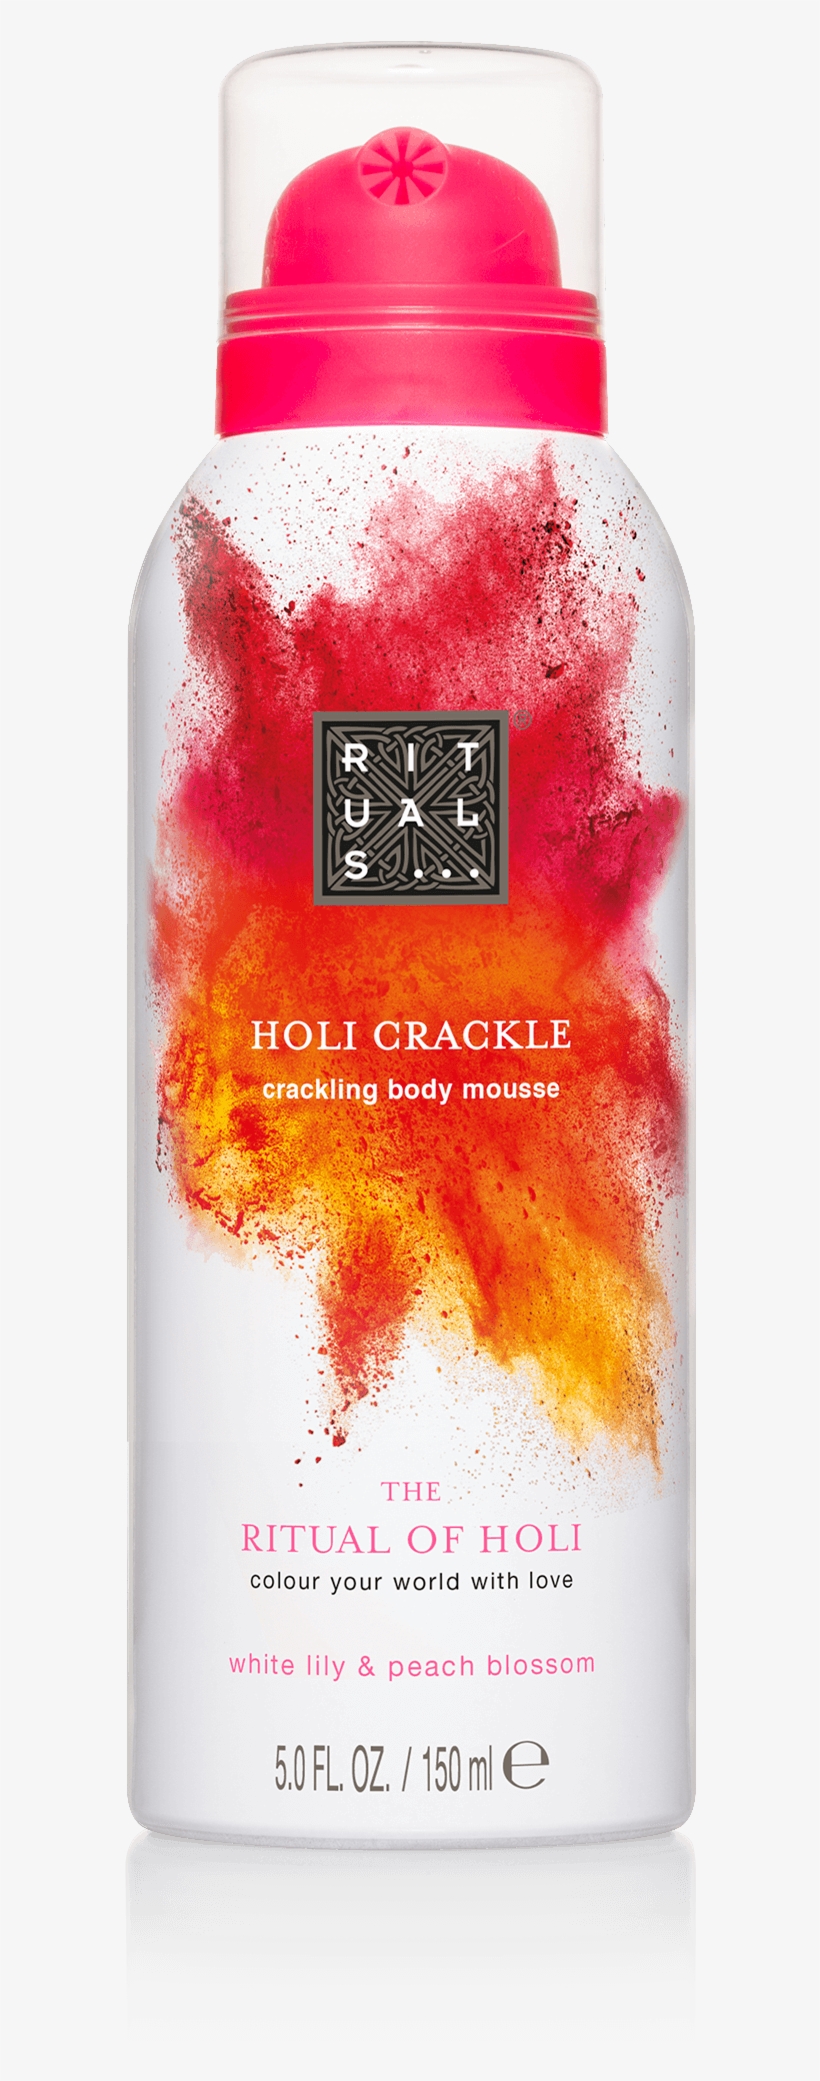 The Ritual Of Holi Crackling Body Mousse - Rituals Holi Crackle, transparent png #344609